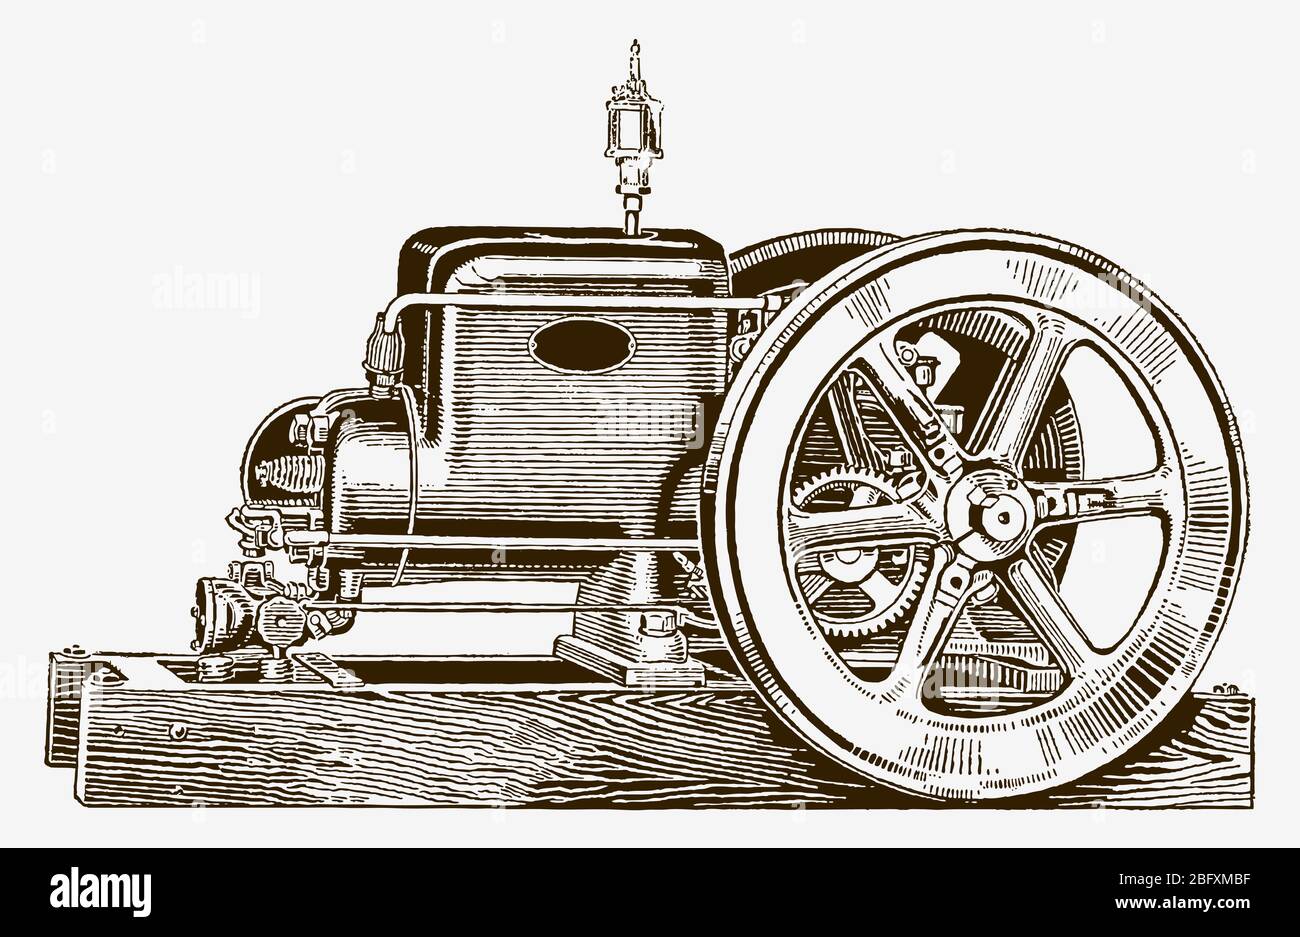 Historical farm engine in side view. Illustration after an engraving from the early 20th century Stock Vector